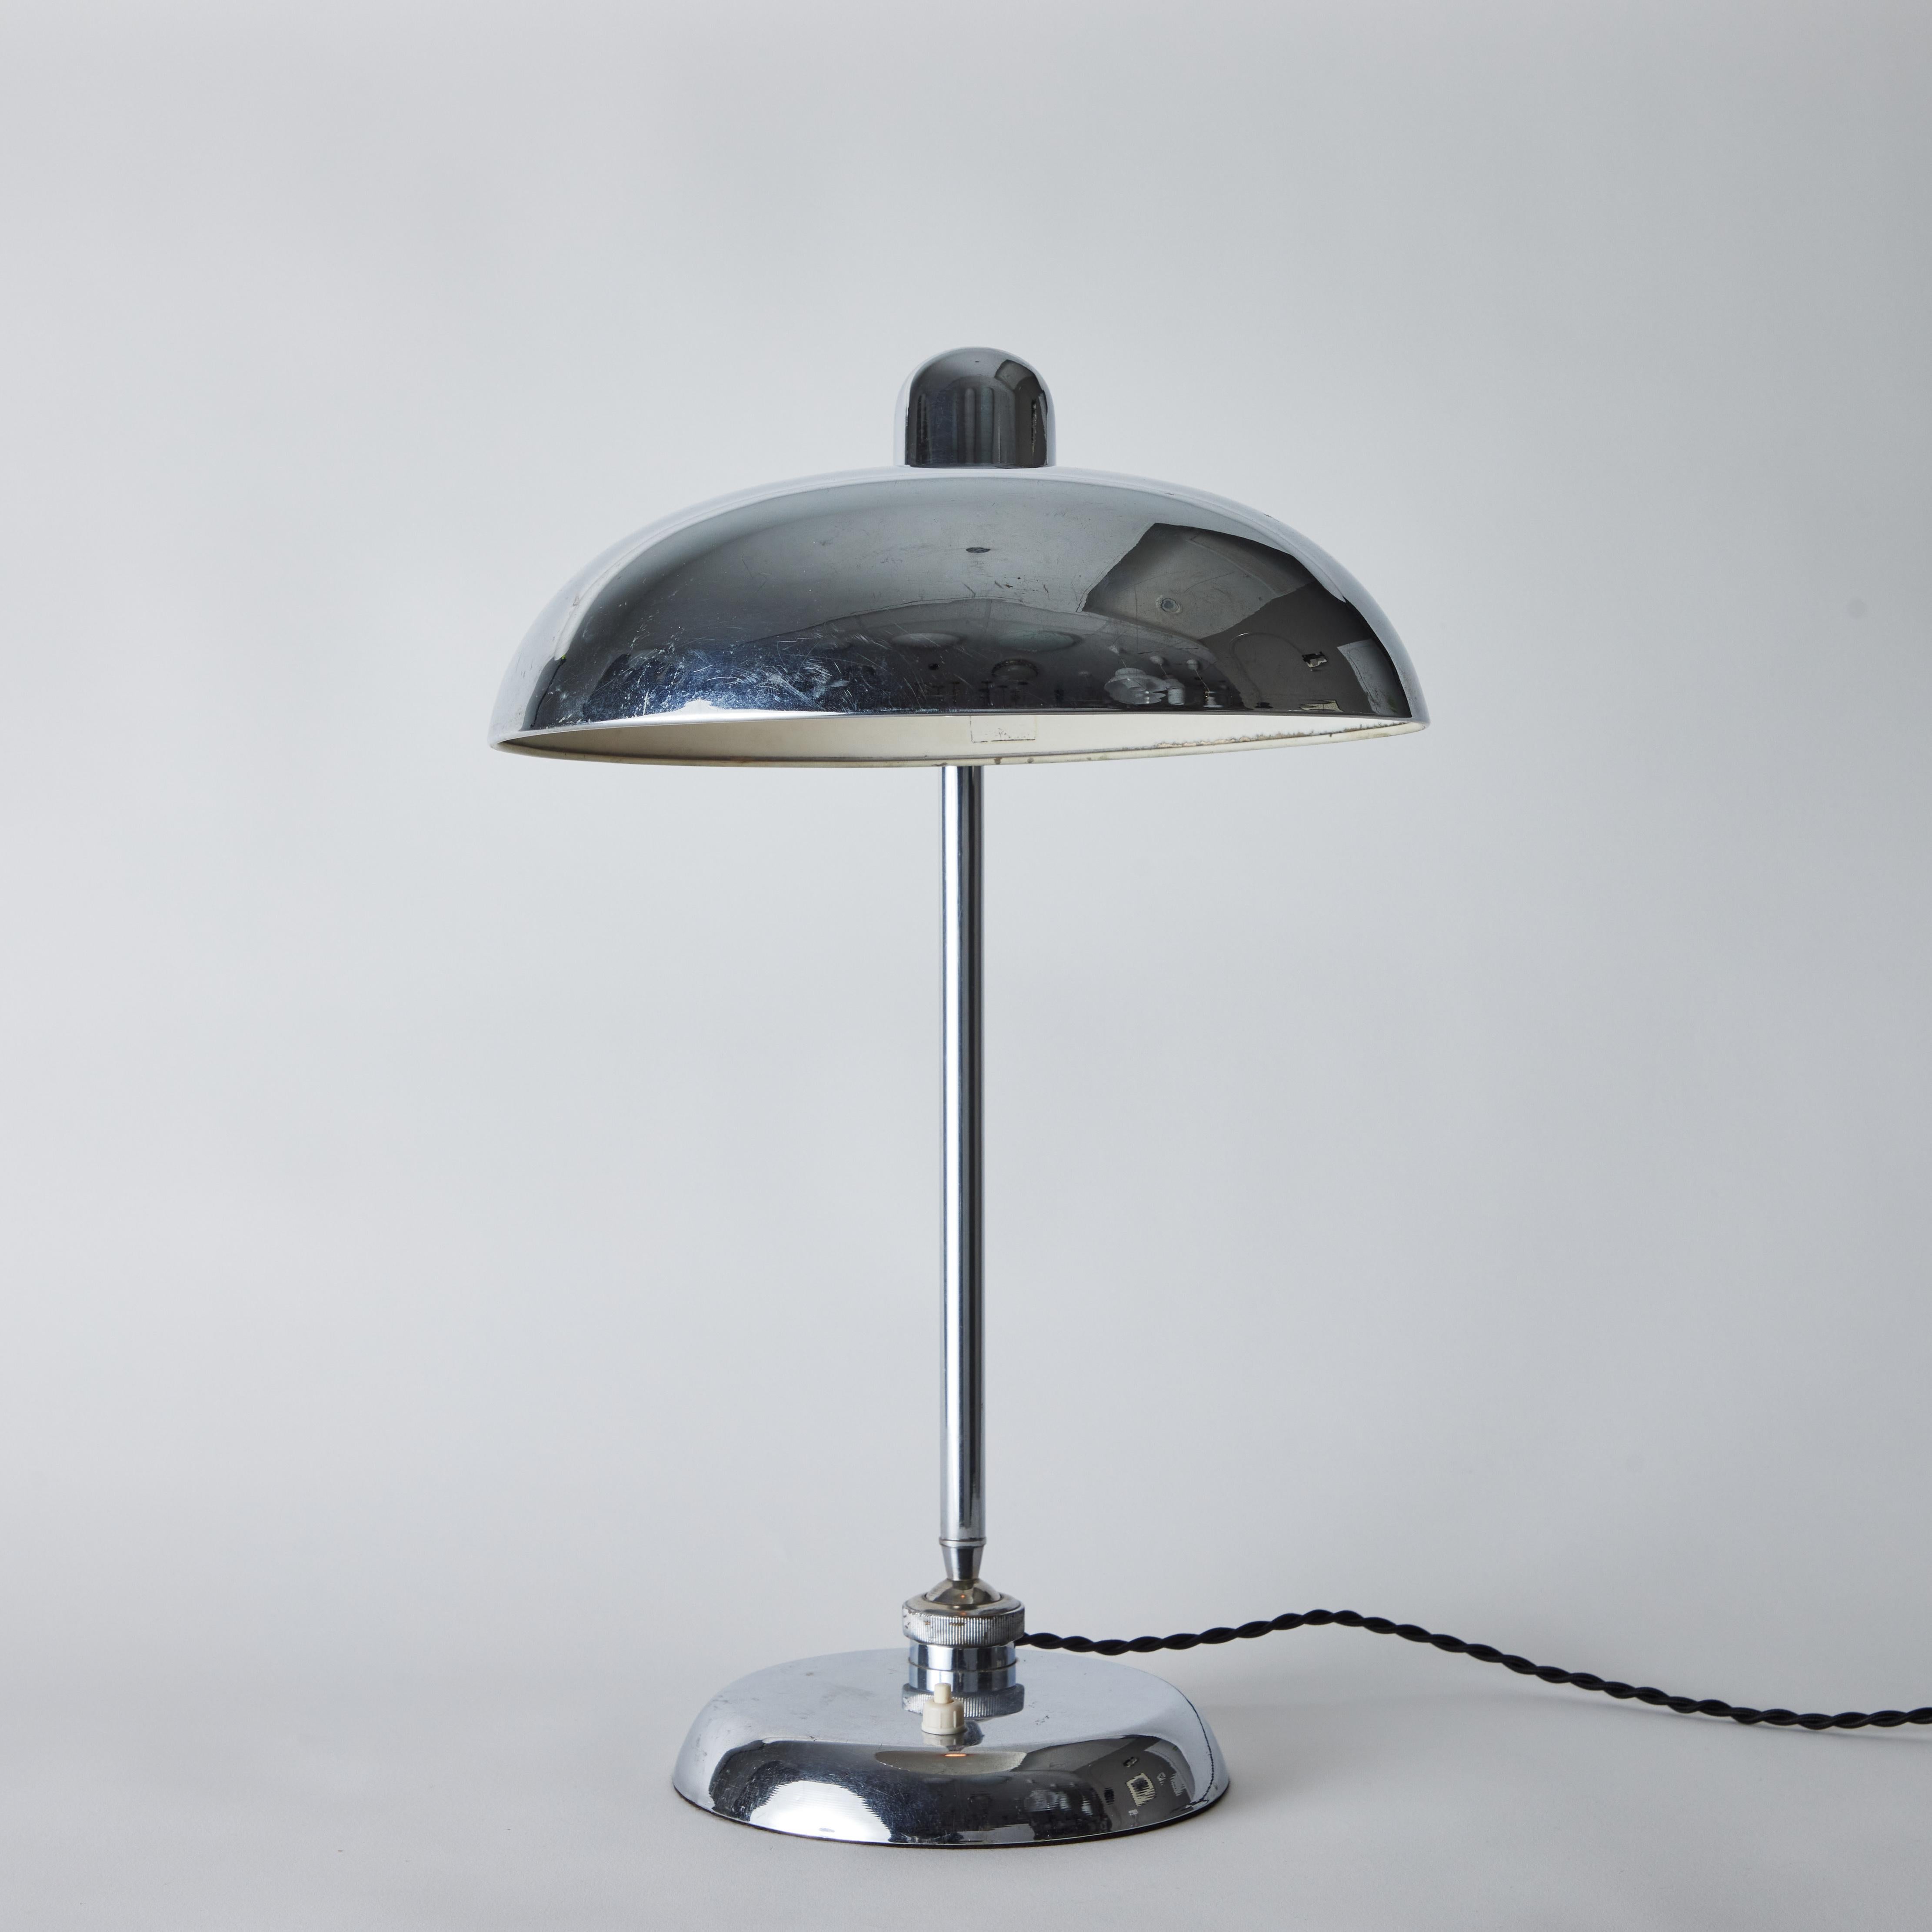 Large 1940s Giovanni Michelucci Chrome Ministerial Table Lamp for Lariolux For Sale 3